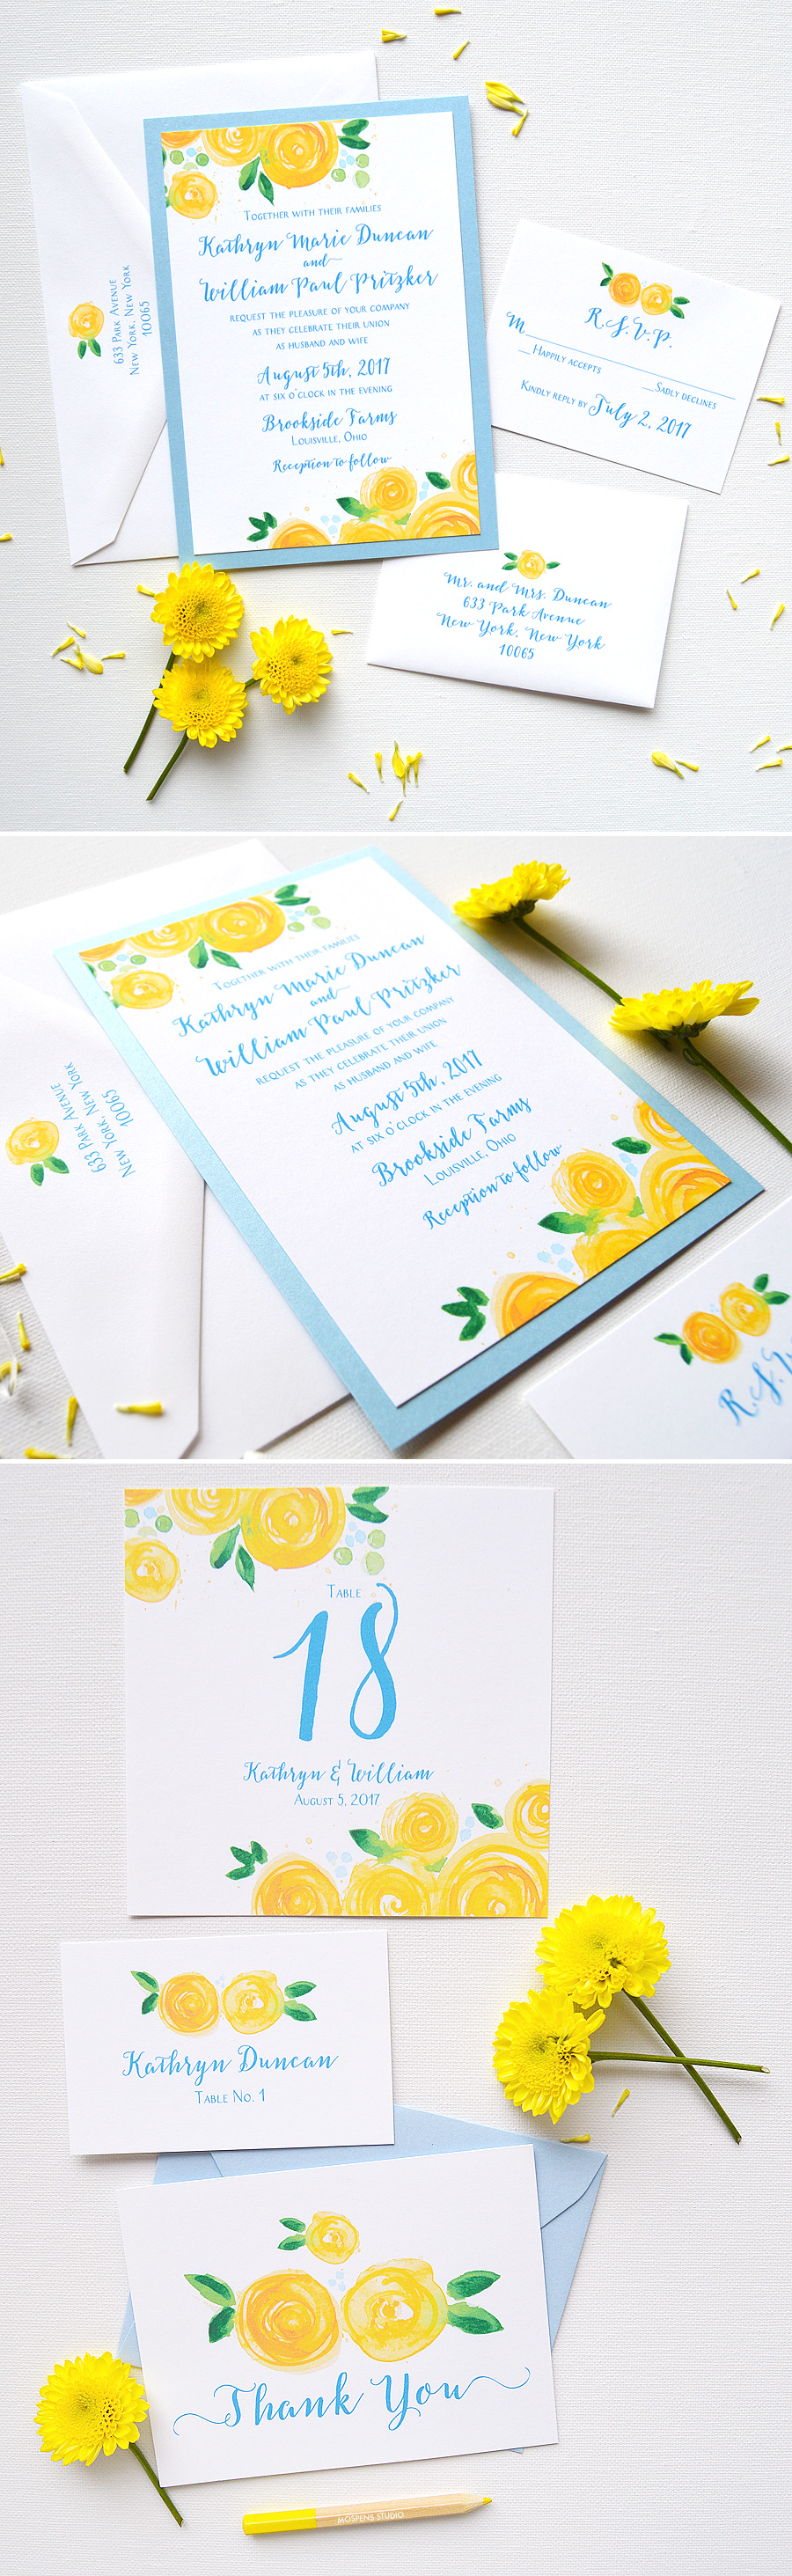 The Yellow Rose Blooms Wedding Invitation design features light blue metallic card layer, original watercolor rose art, and modern fonts in beautiful blue ink. Letterpress and raised ink upgrades available! - www.mospensstudio.com